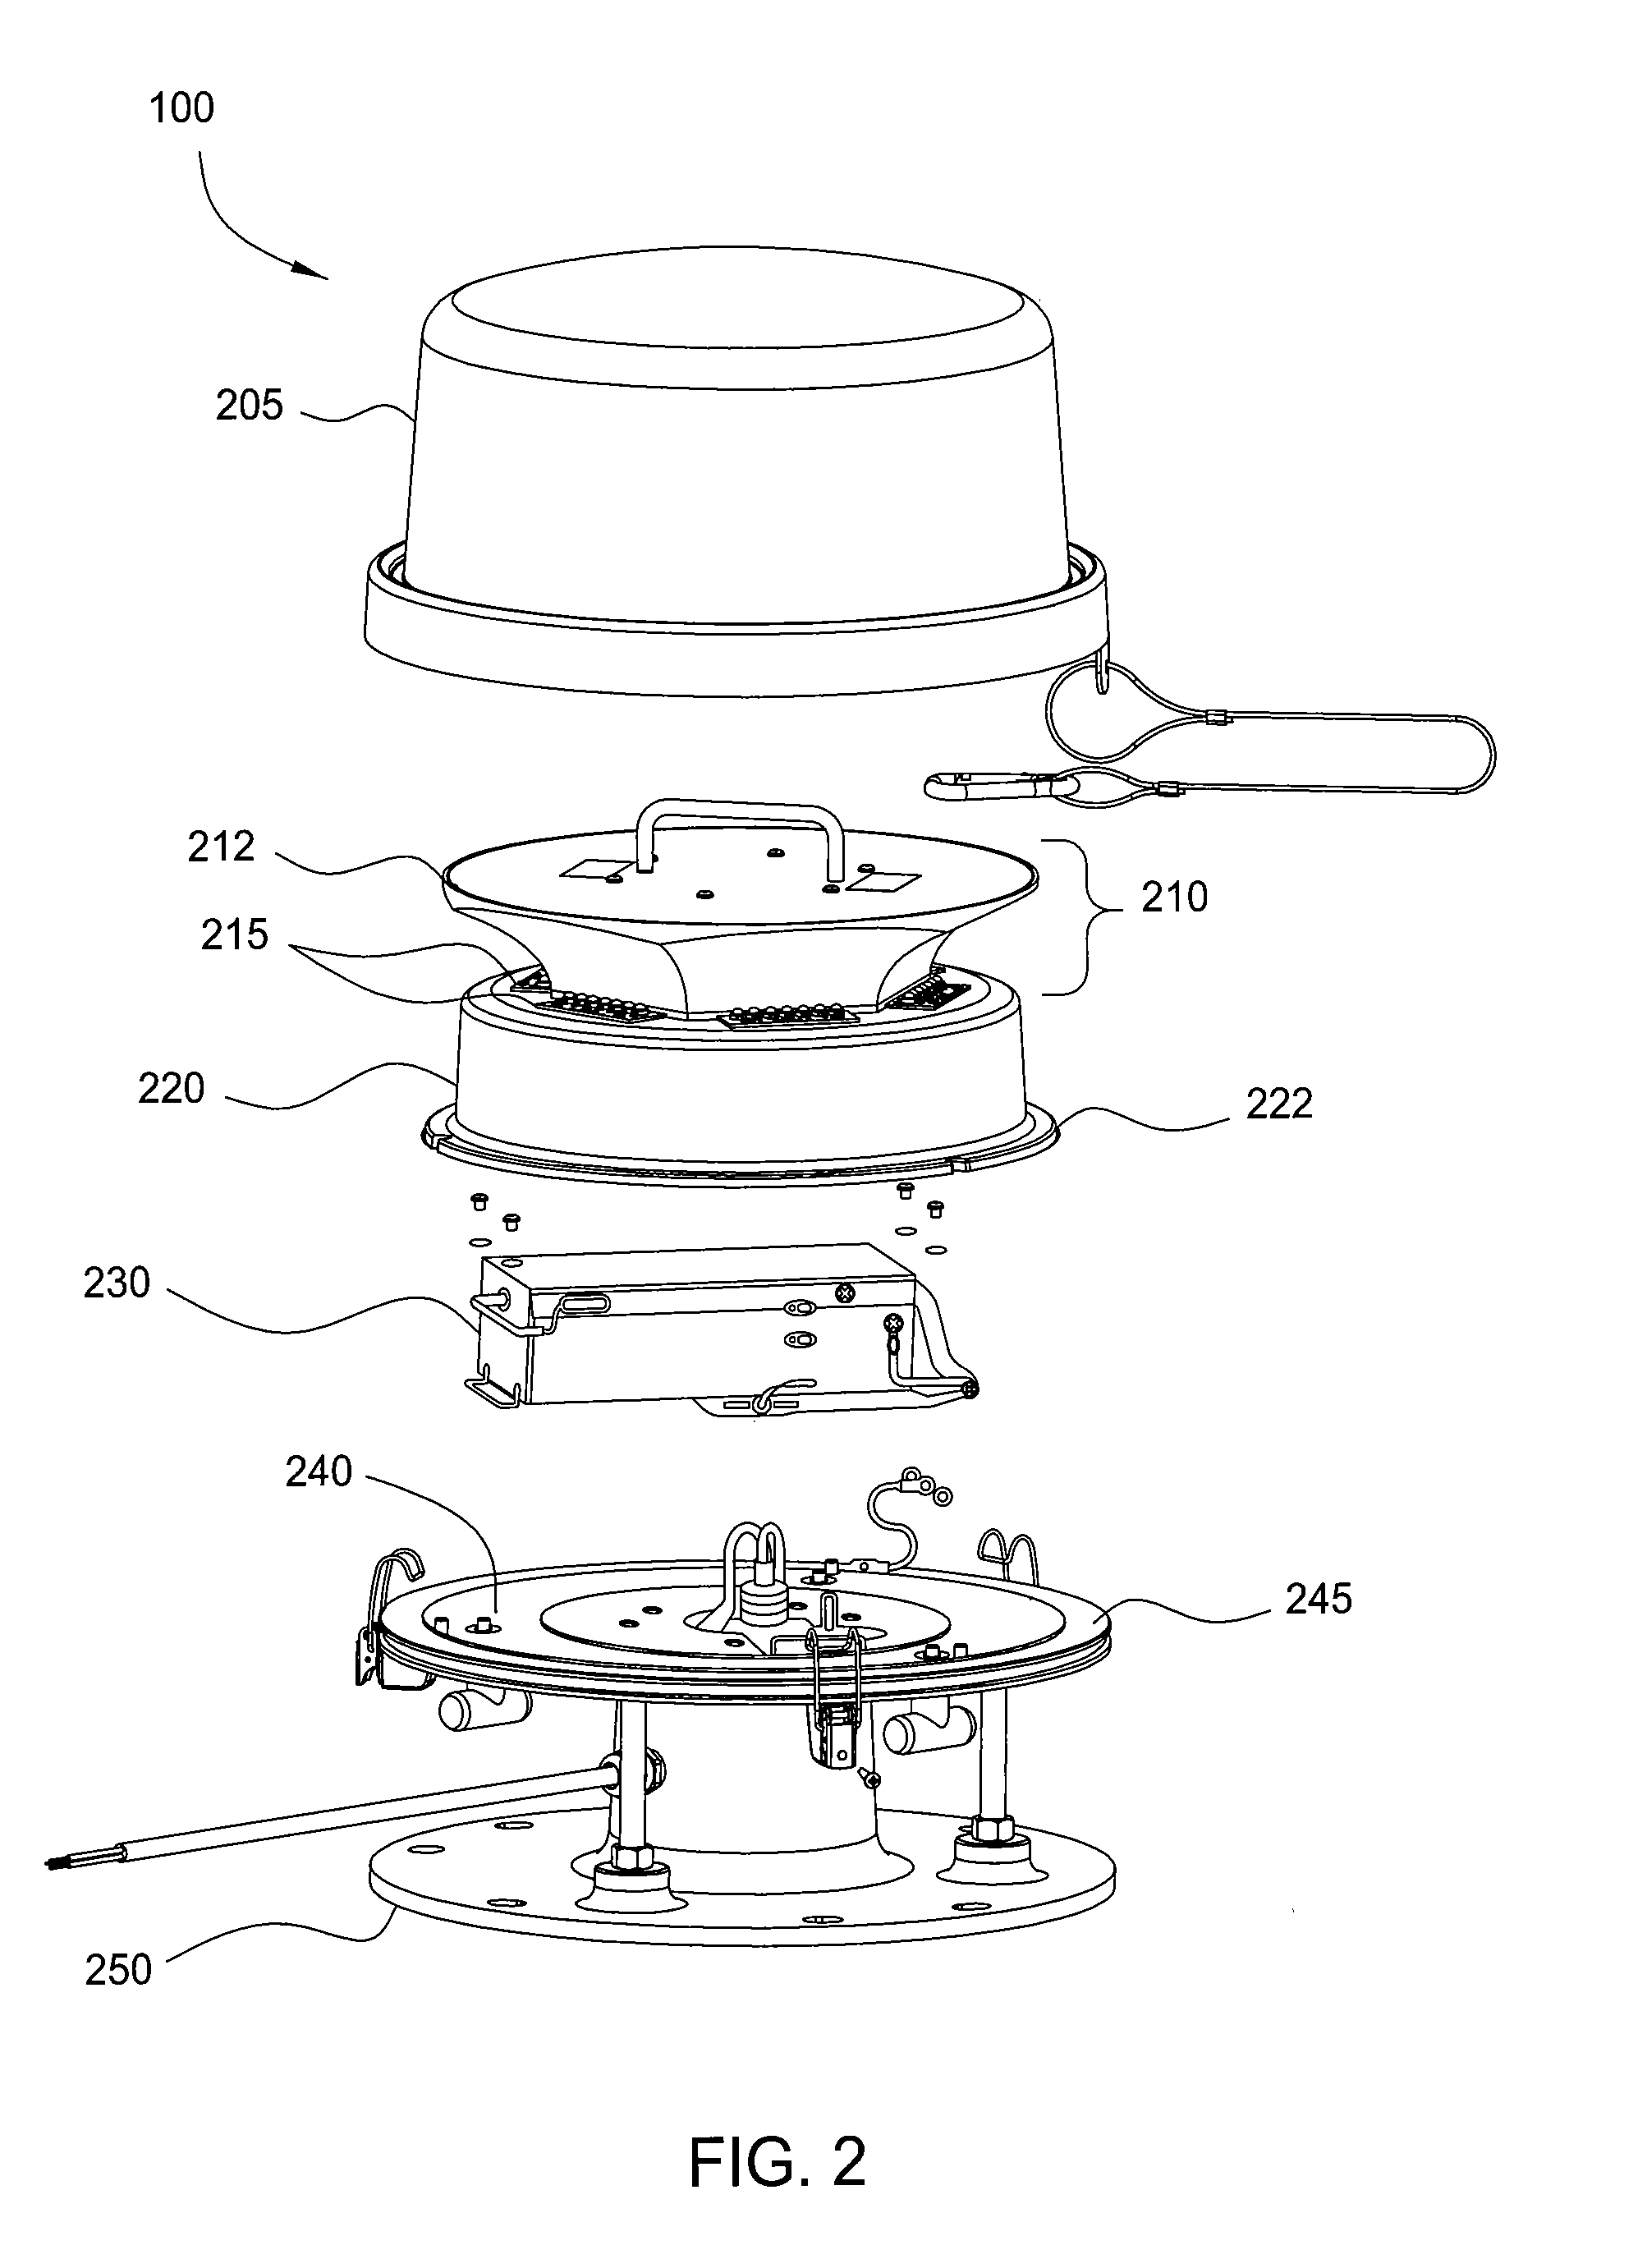 Method and apparatus for providing an LED light for use in hazardous locations